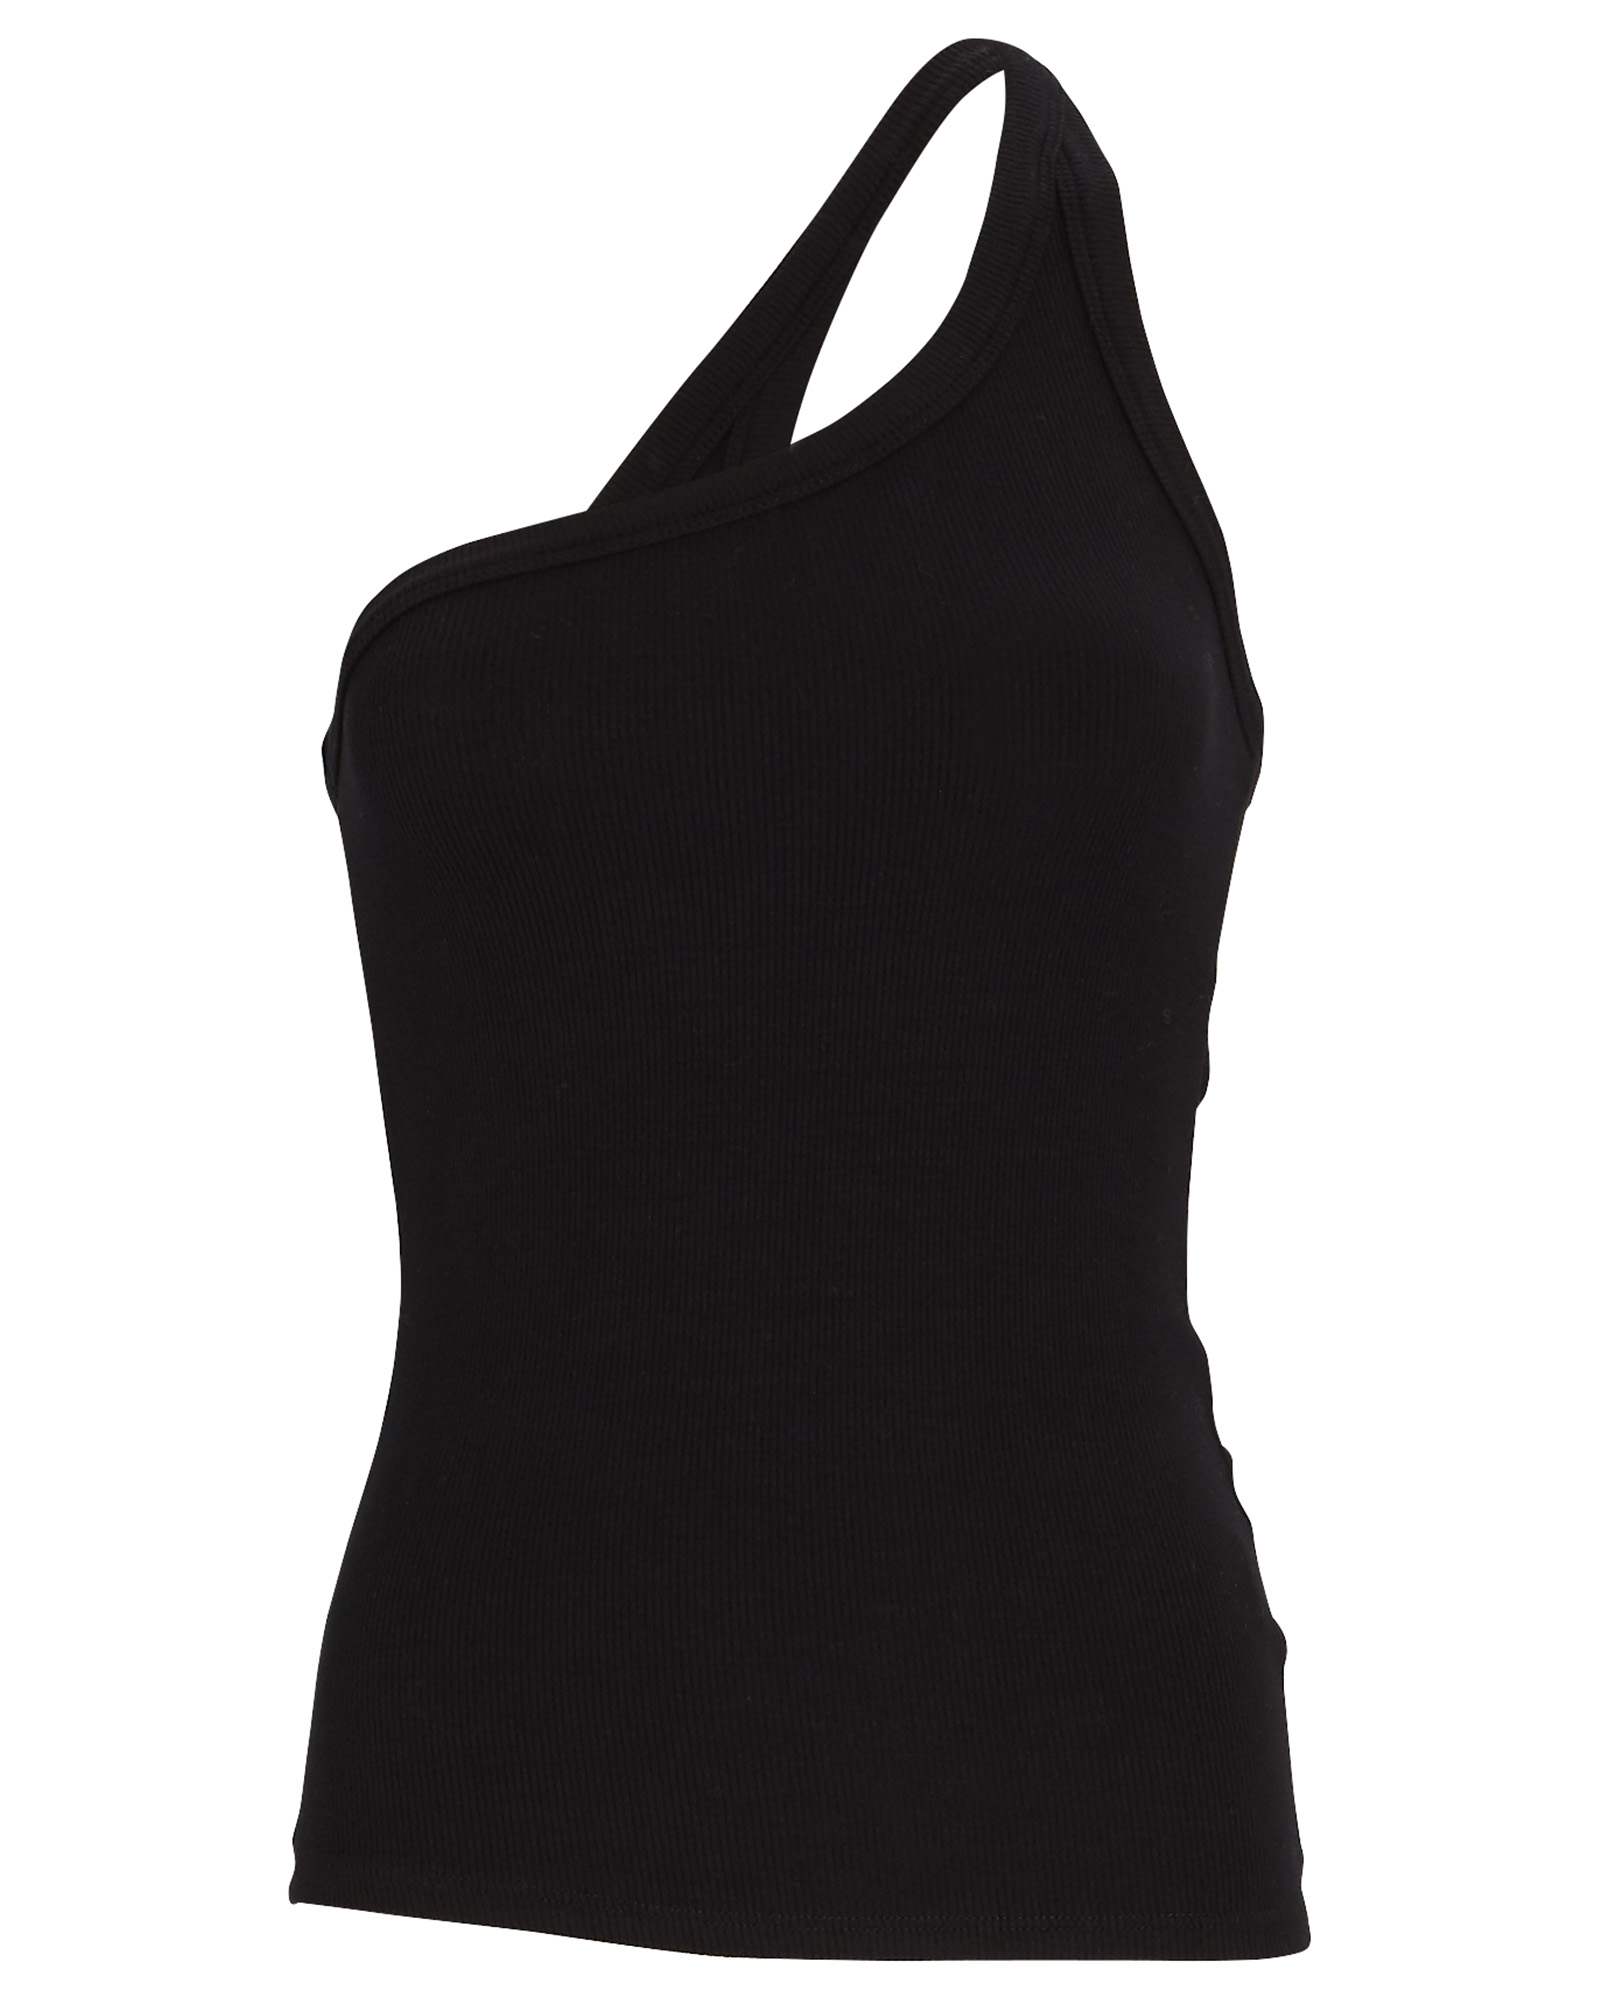 The Line by K Driss One-Shoulder Tank Top | INTERMIX®